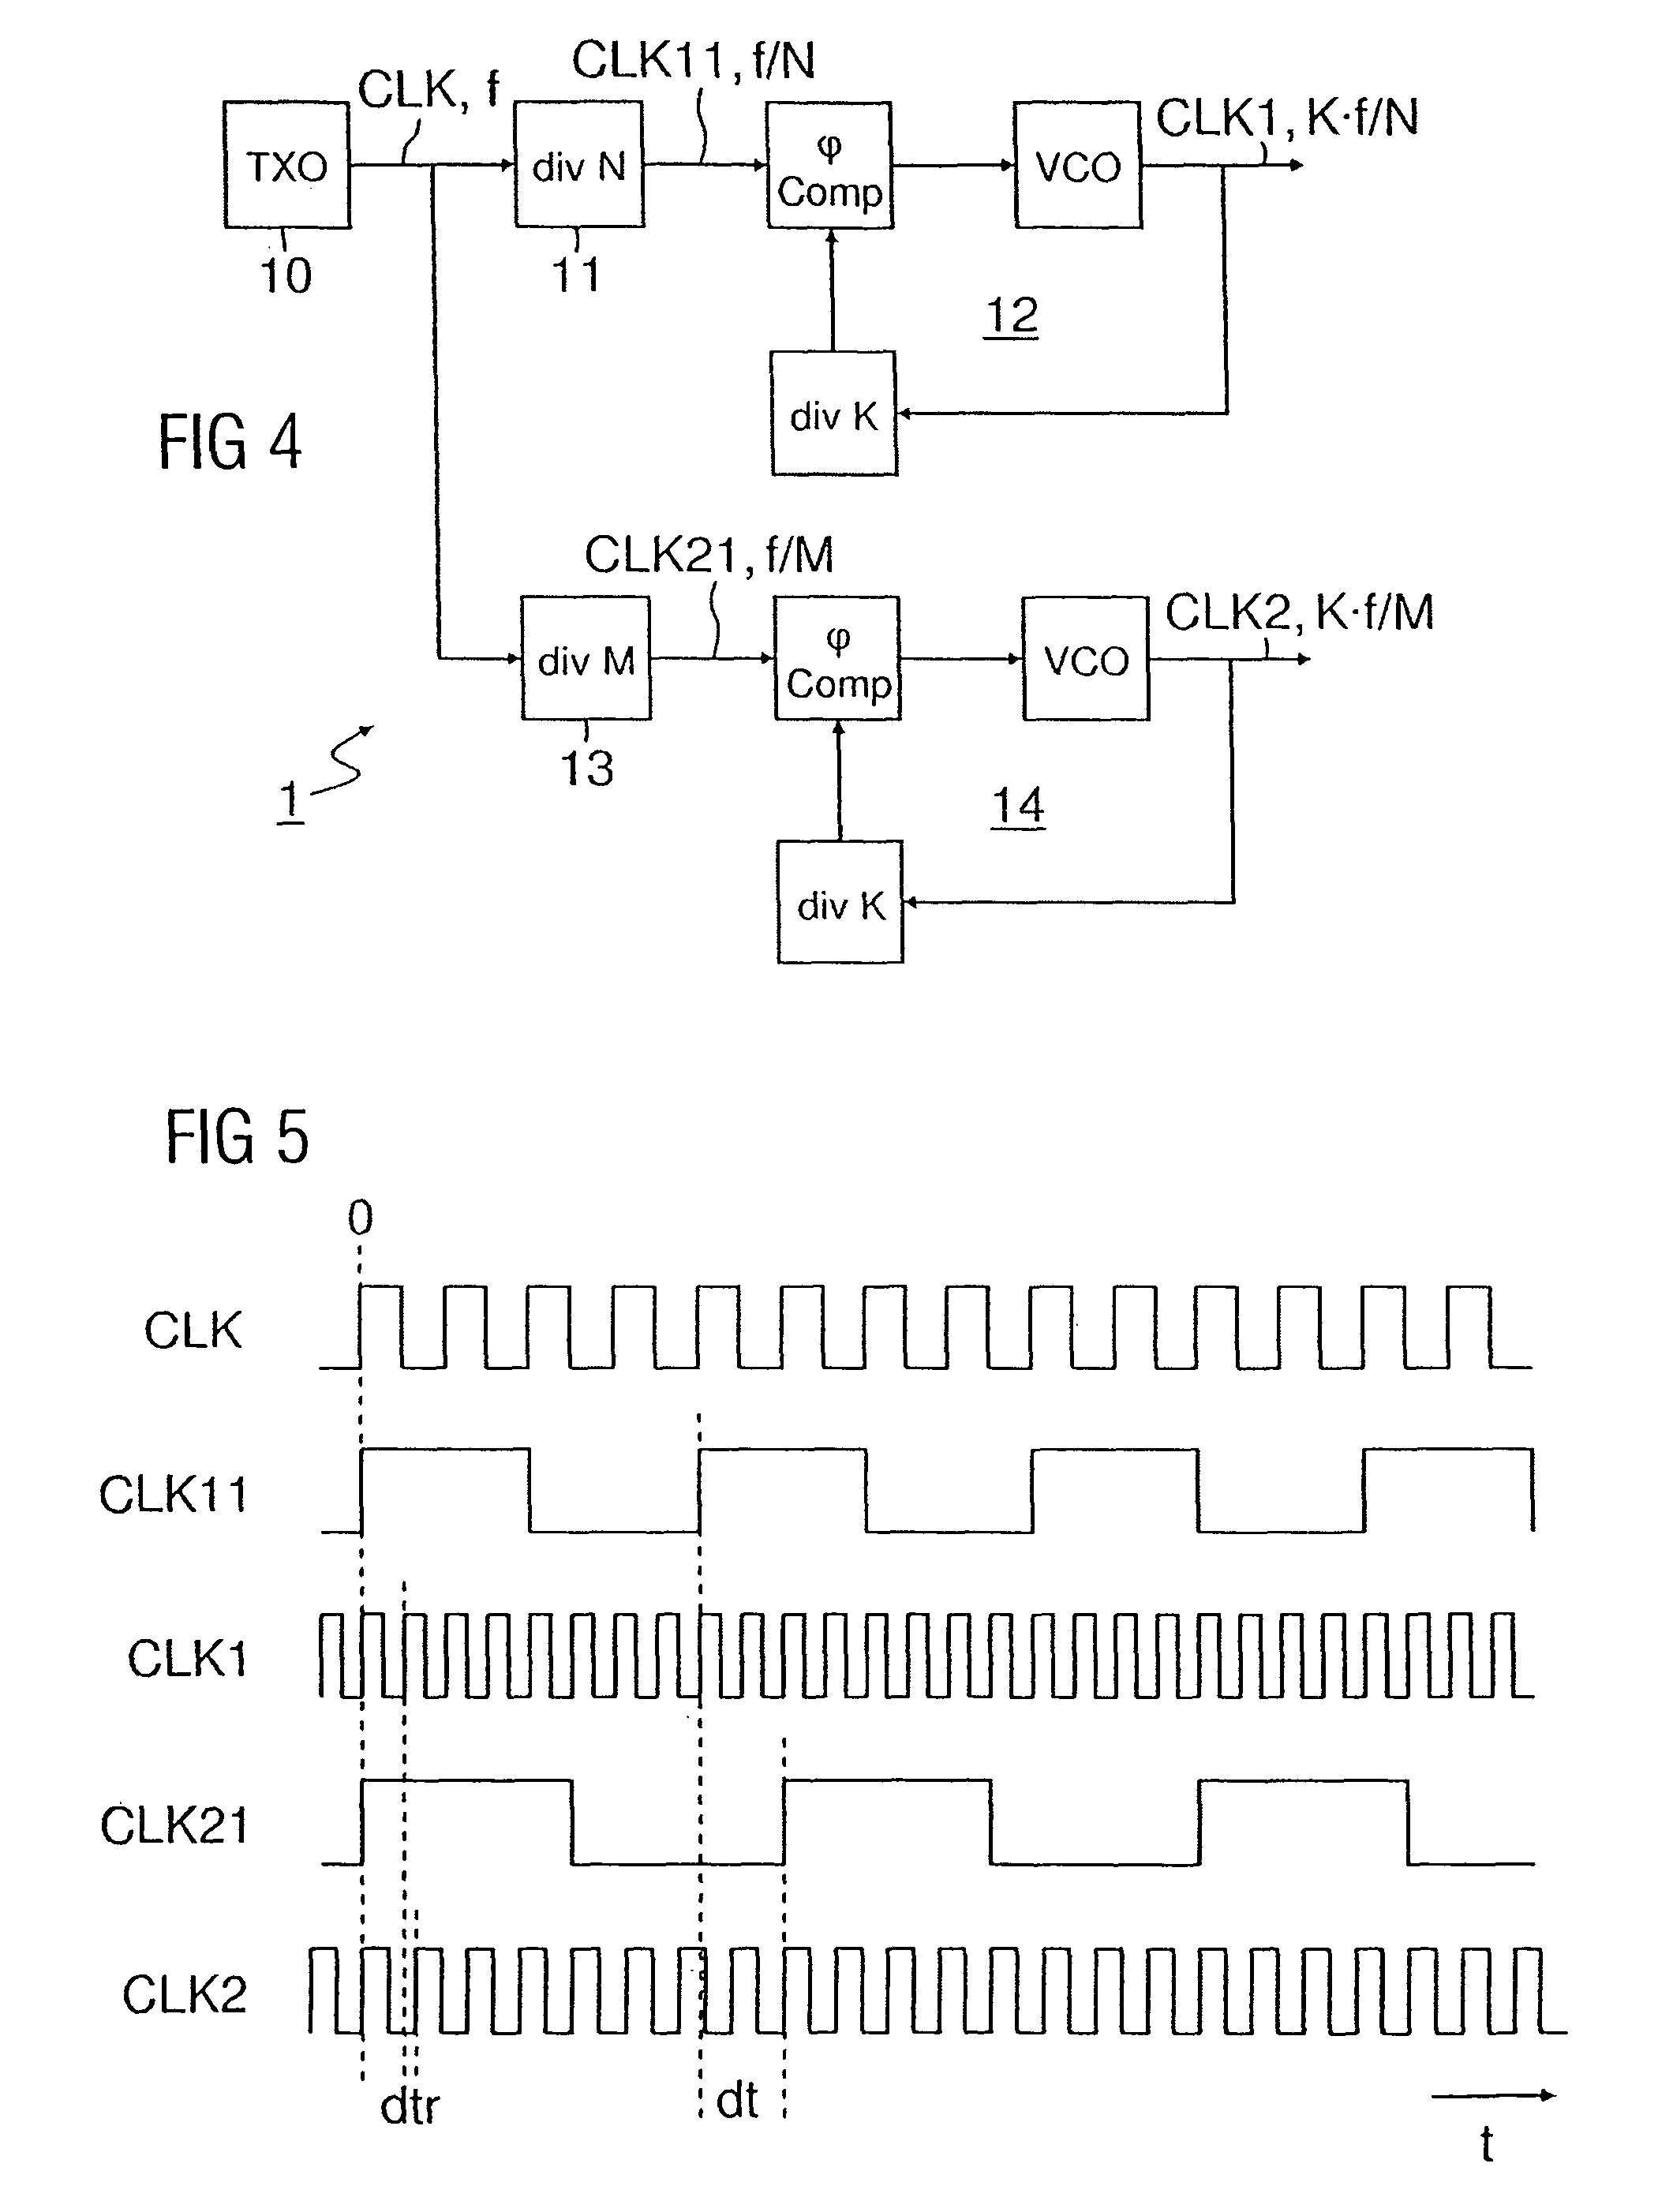 Digital time base generator and method for providing a first clock signal and a second clock signal